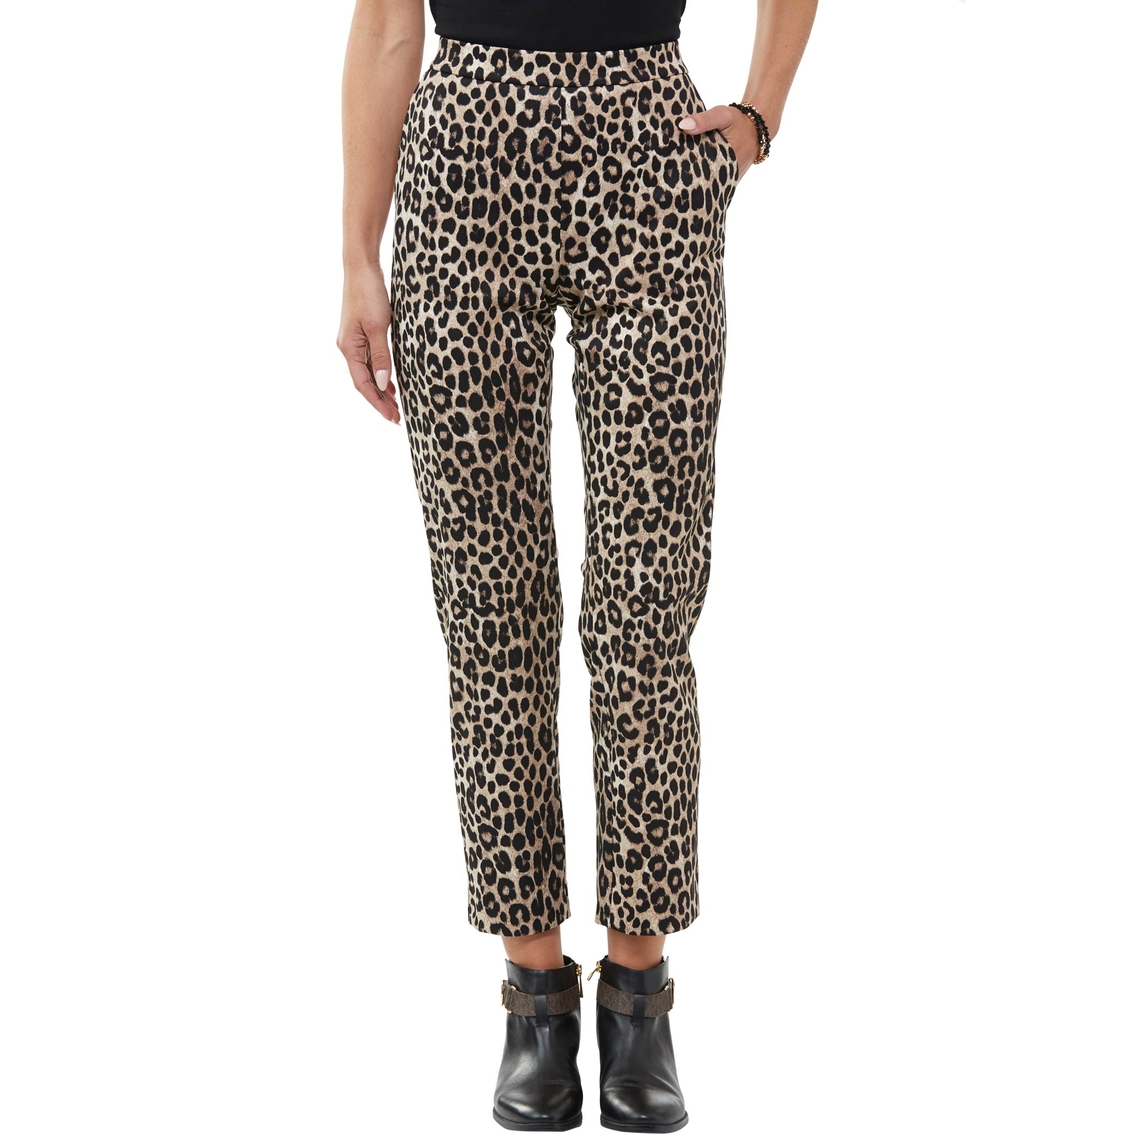 Michael Kors Cheetah Pull On Trouser | Pants | Clothing & Accessories ...